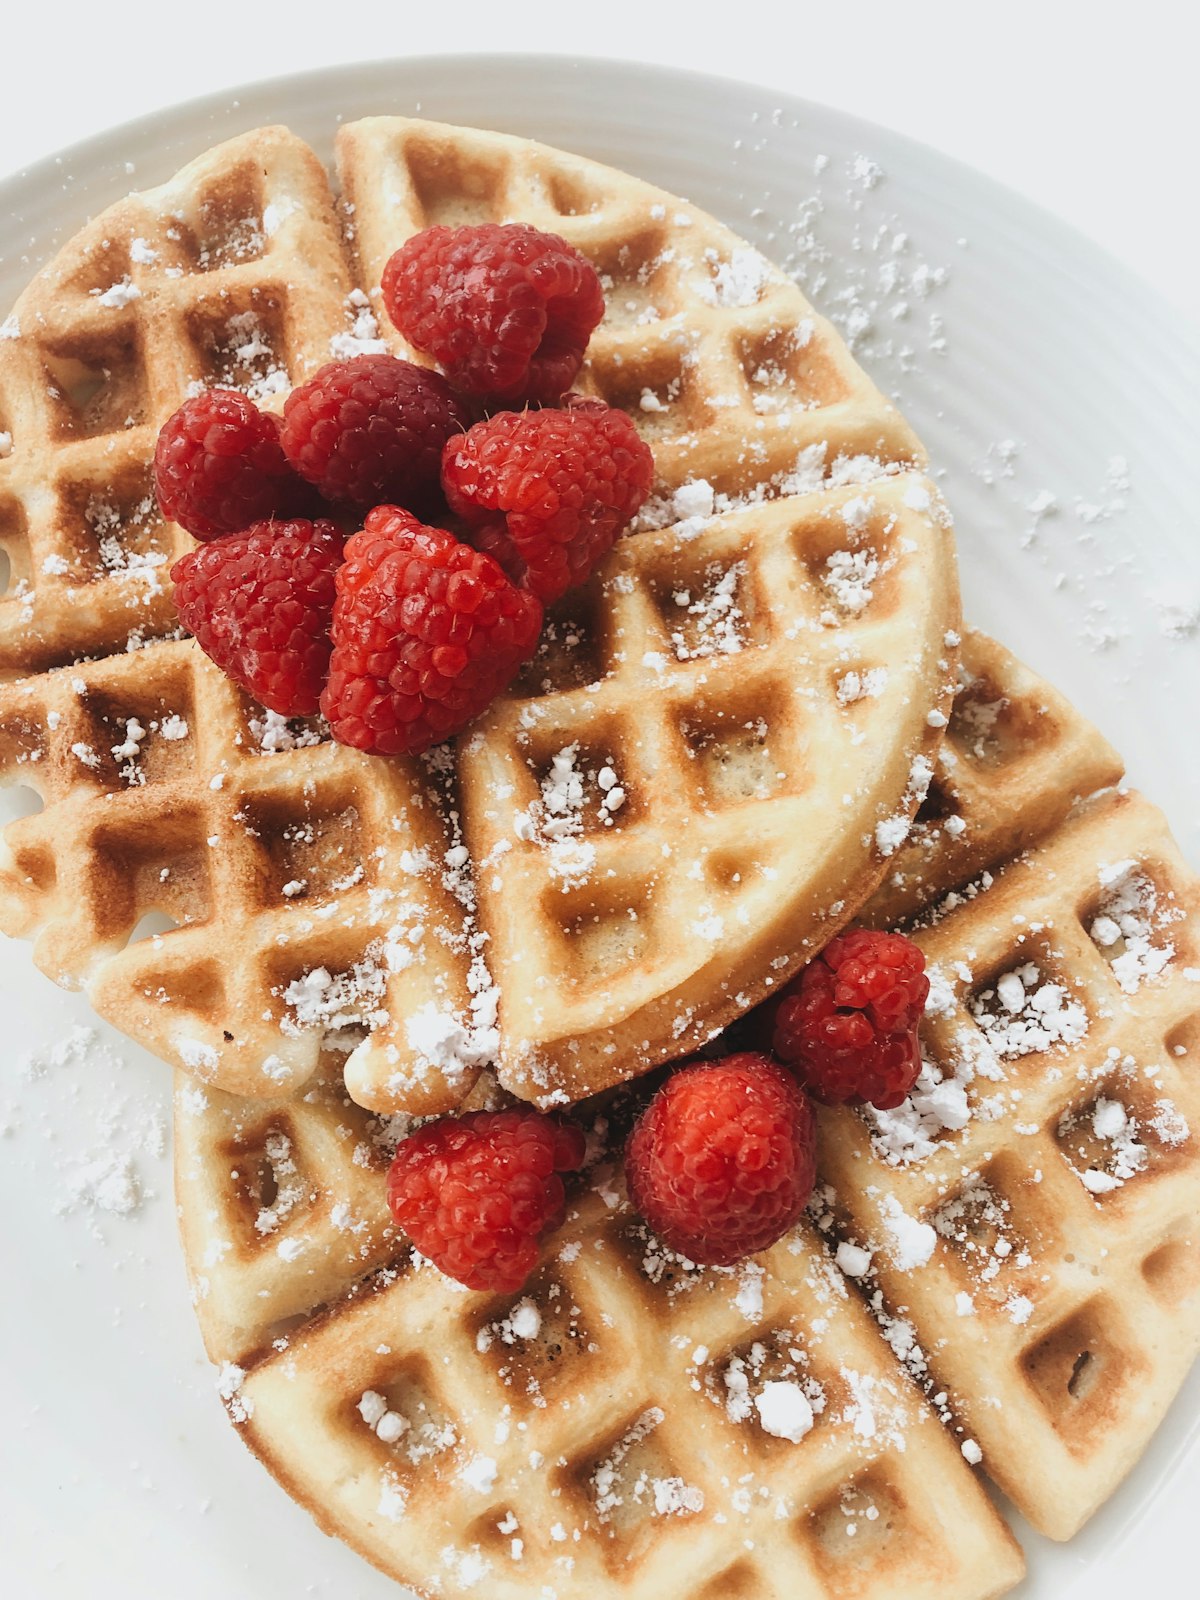 Whip Out A Thin Waffle Maker Whenever Your Cravings Call: 5 Best Picks